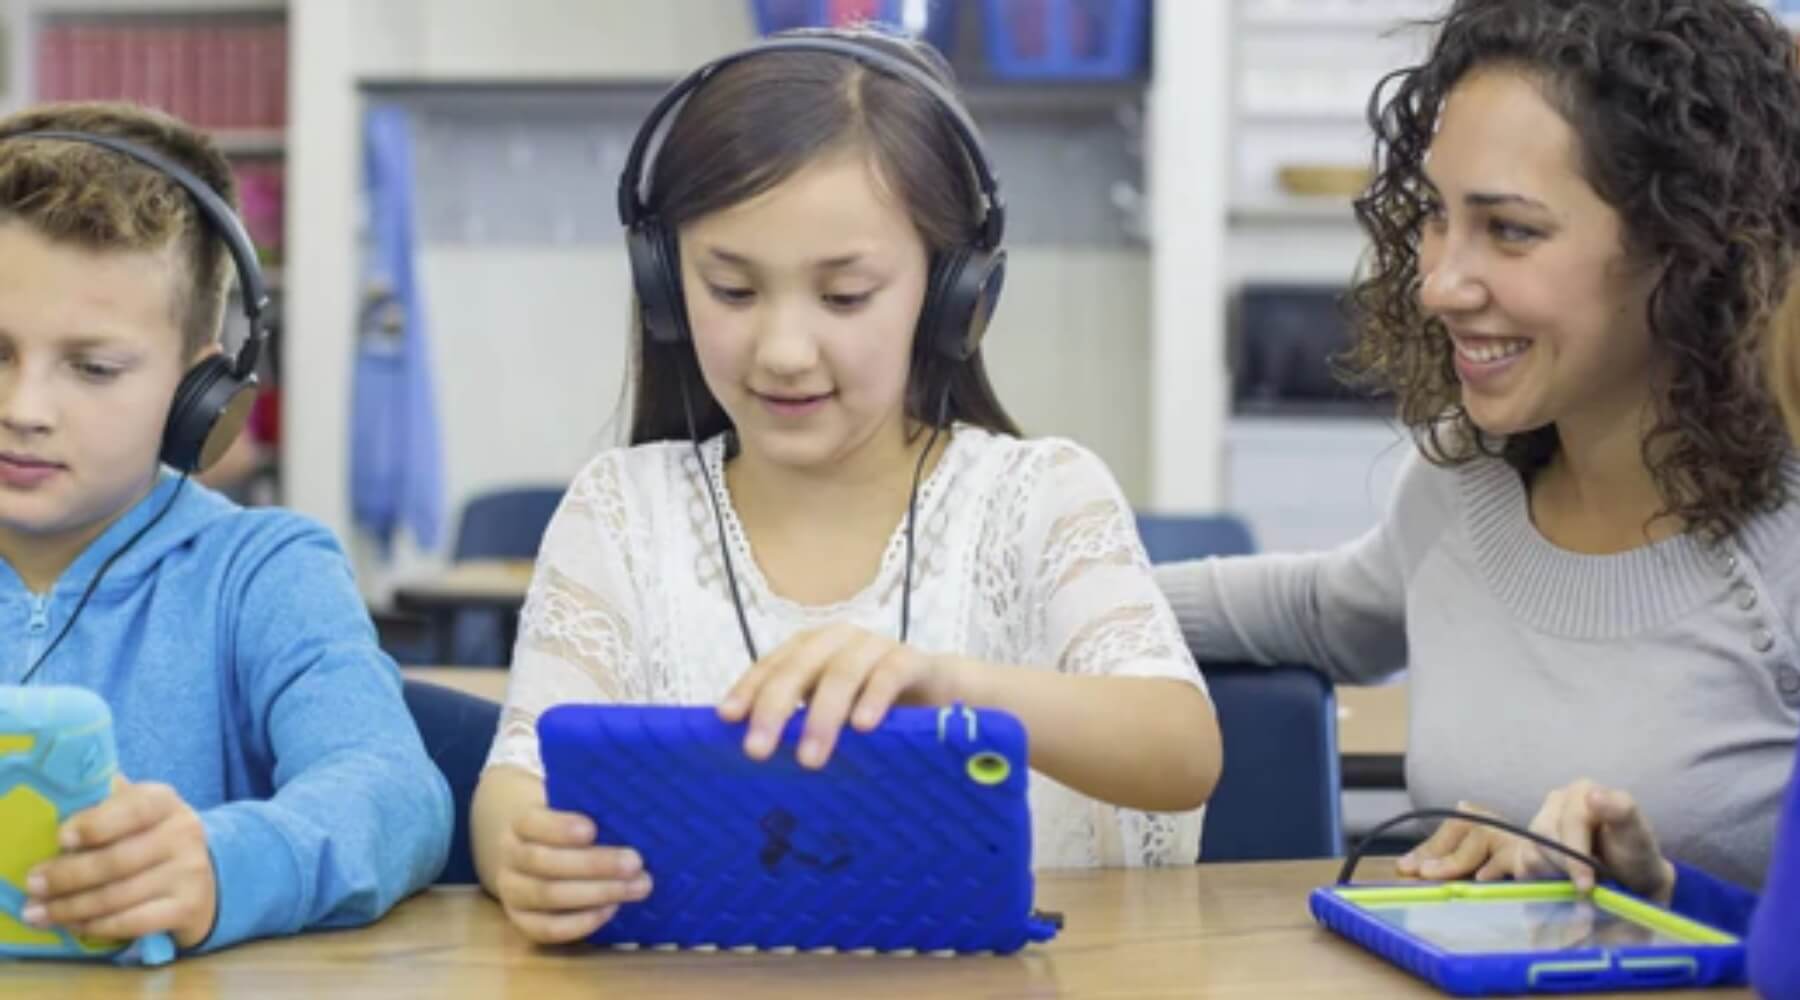 Finding the best headphones for school can be a challenge, but it's important to find a pair that will work well for you.